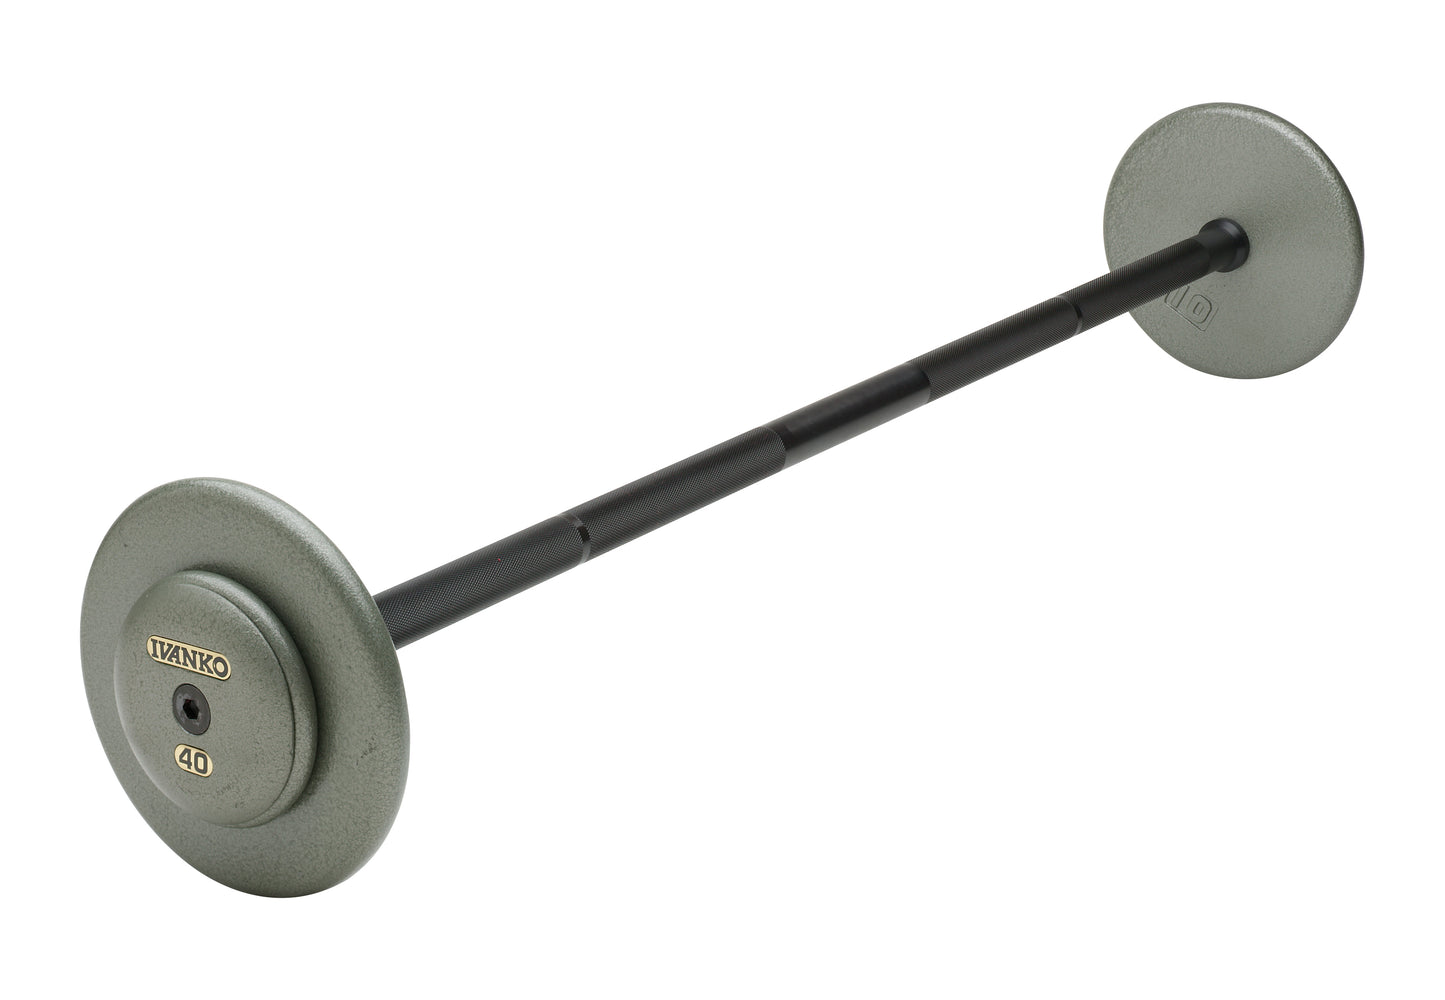 Ivanko straight-bar fixed barbell with grey cast iron plates